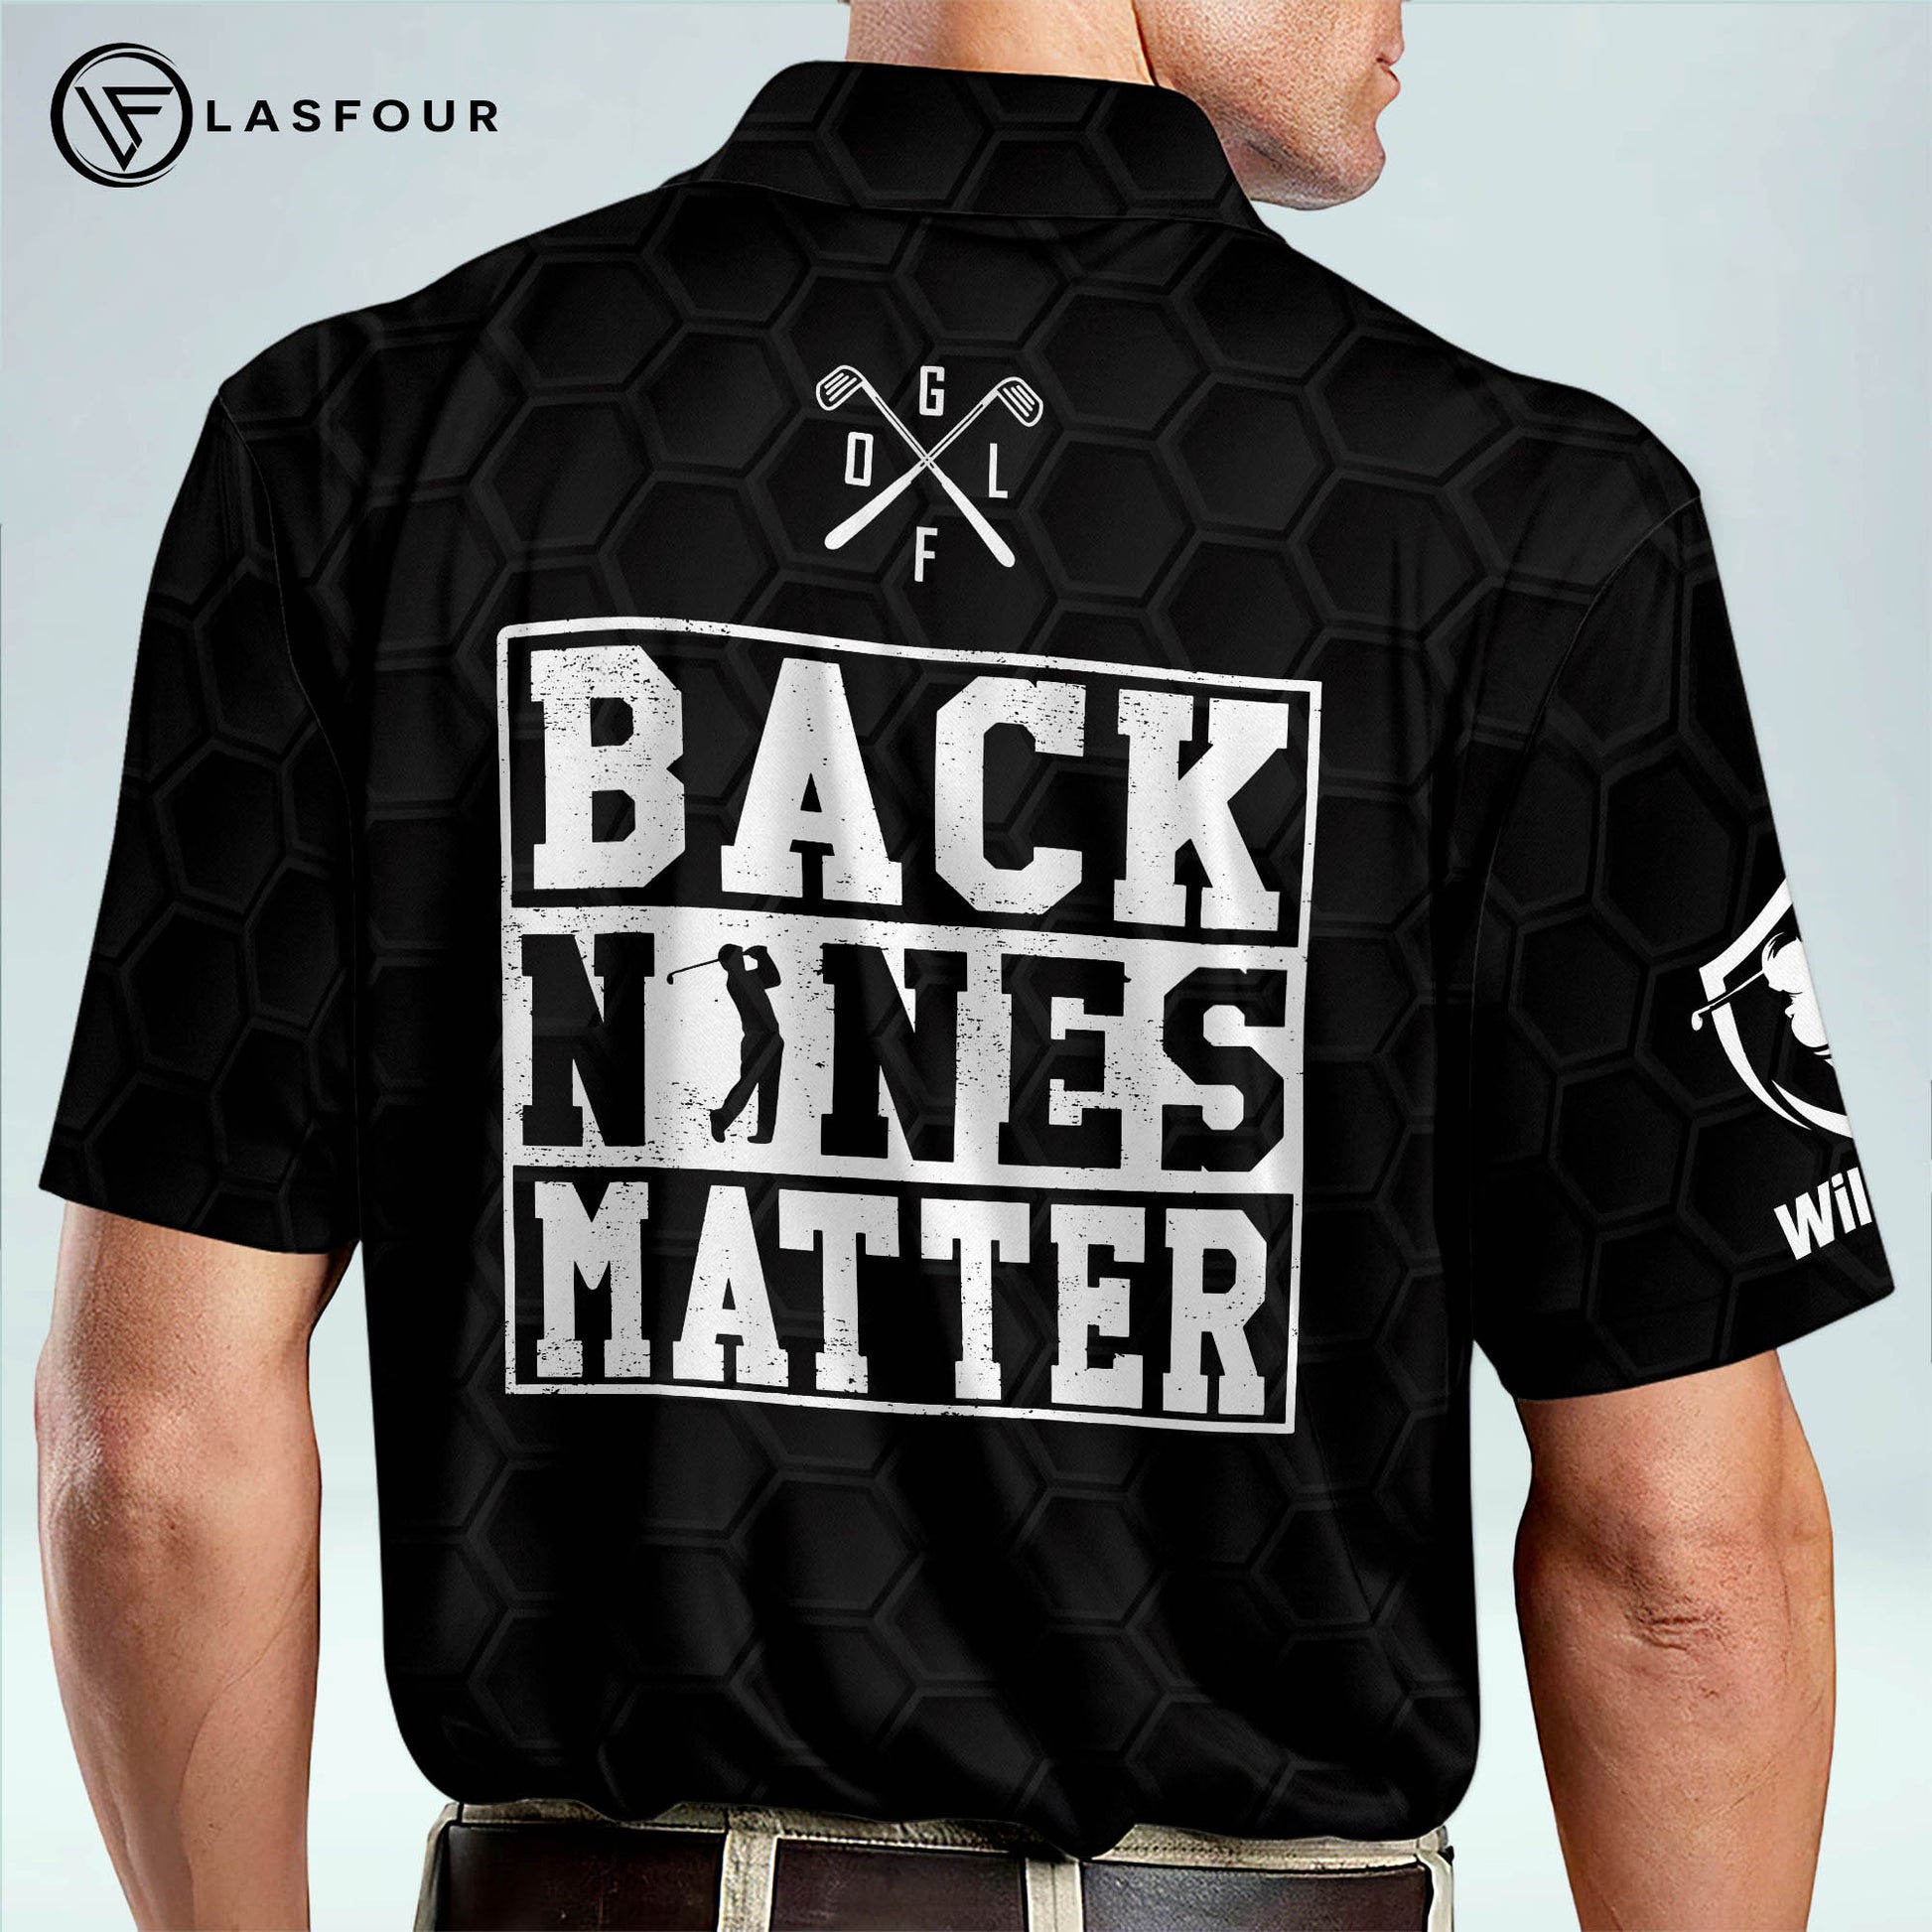 Lasfour Personalized 3D Funny Golf Polo Shirts for Men, Back Nines